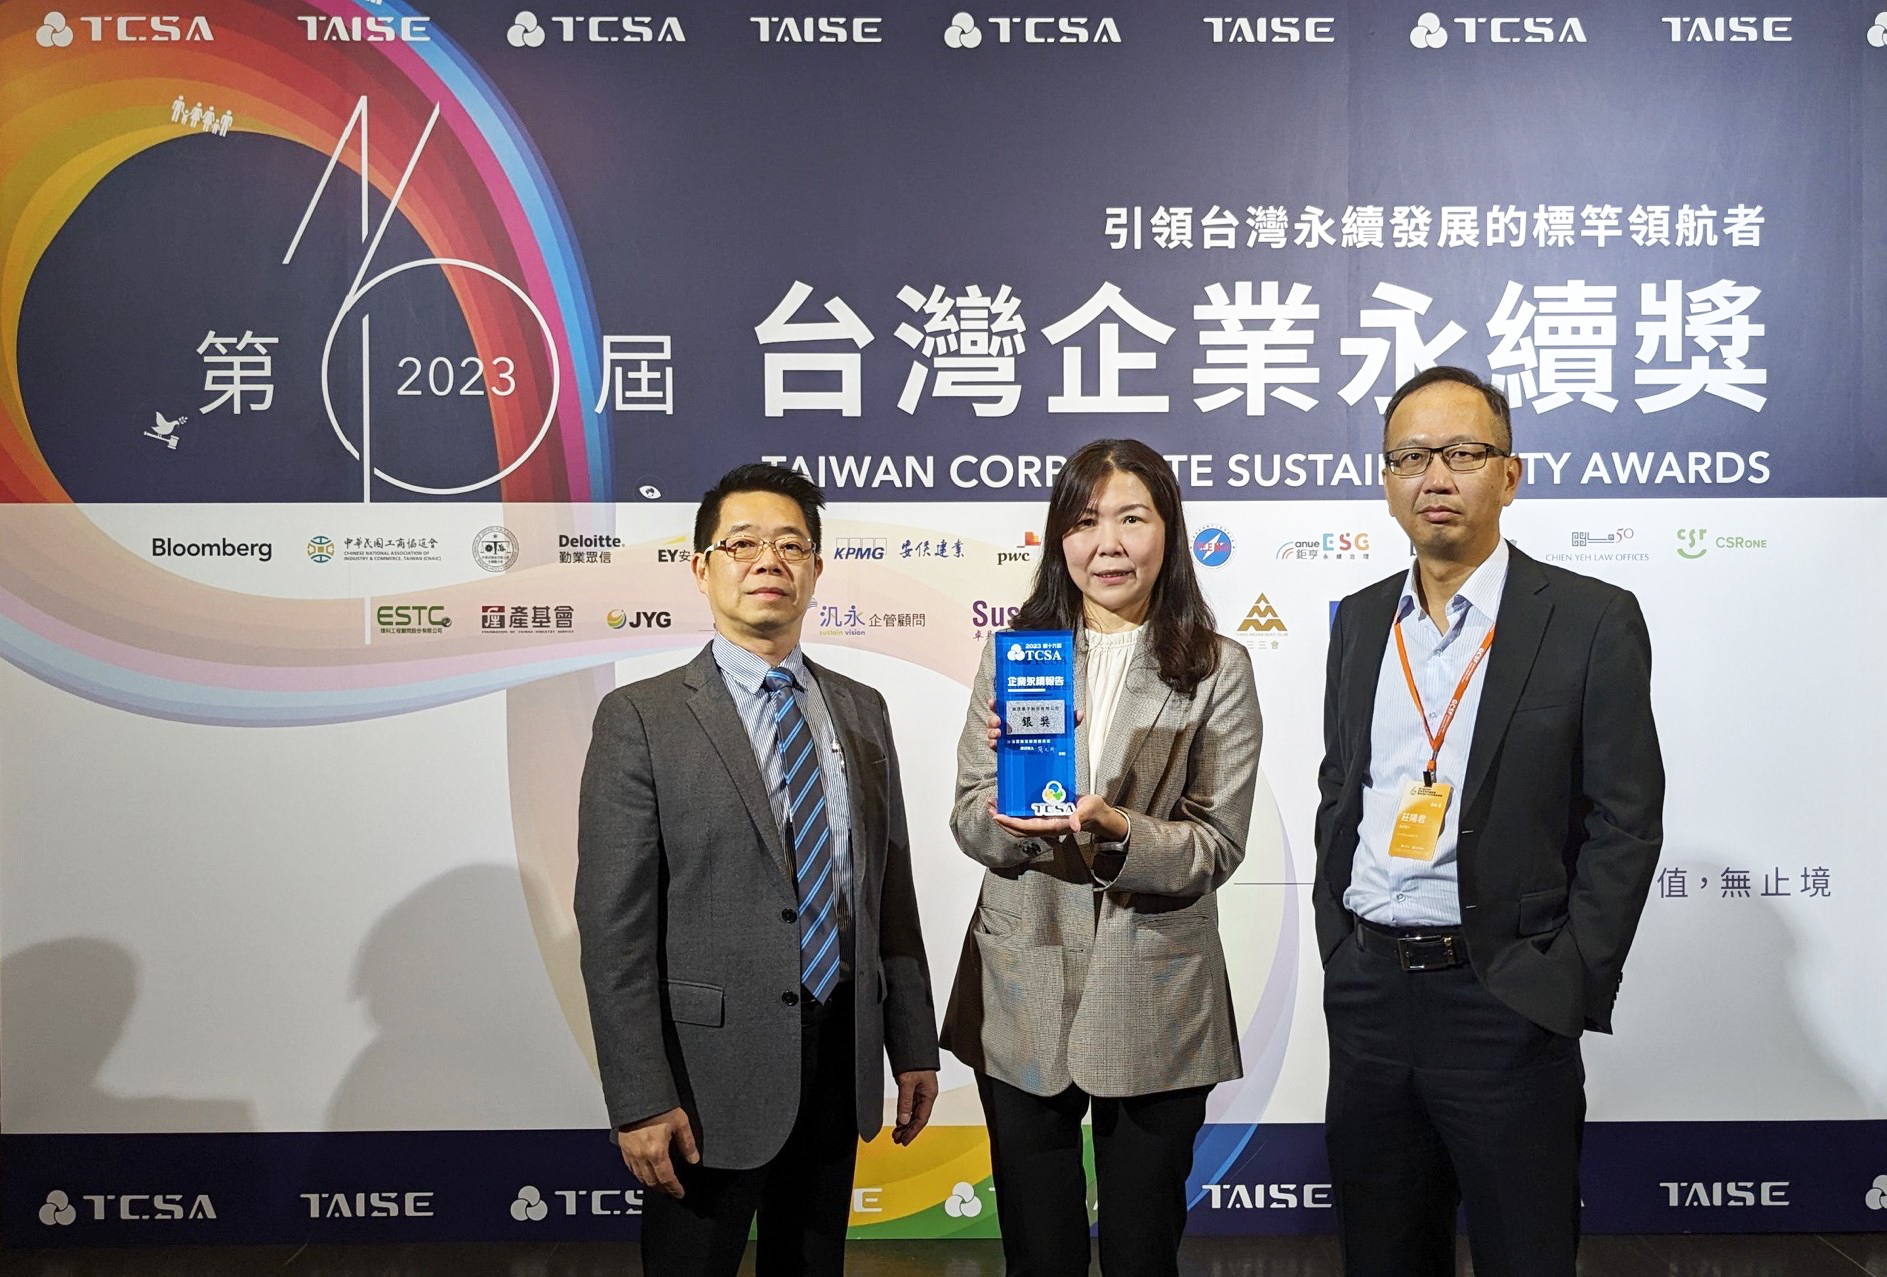 Chroma ATE Honored with 2023 Taiwan Corporate Sustainability Silver Award